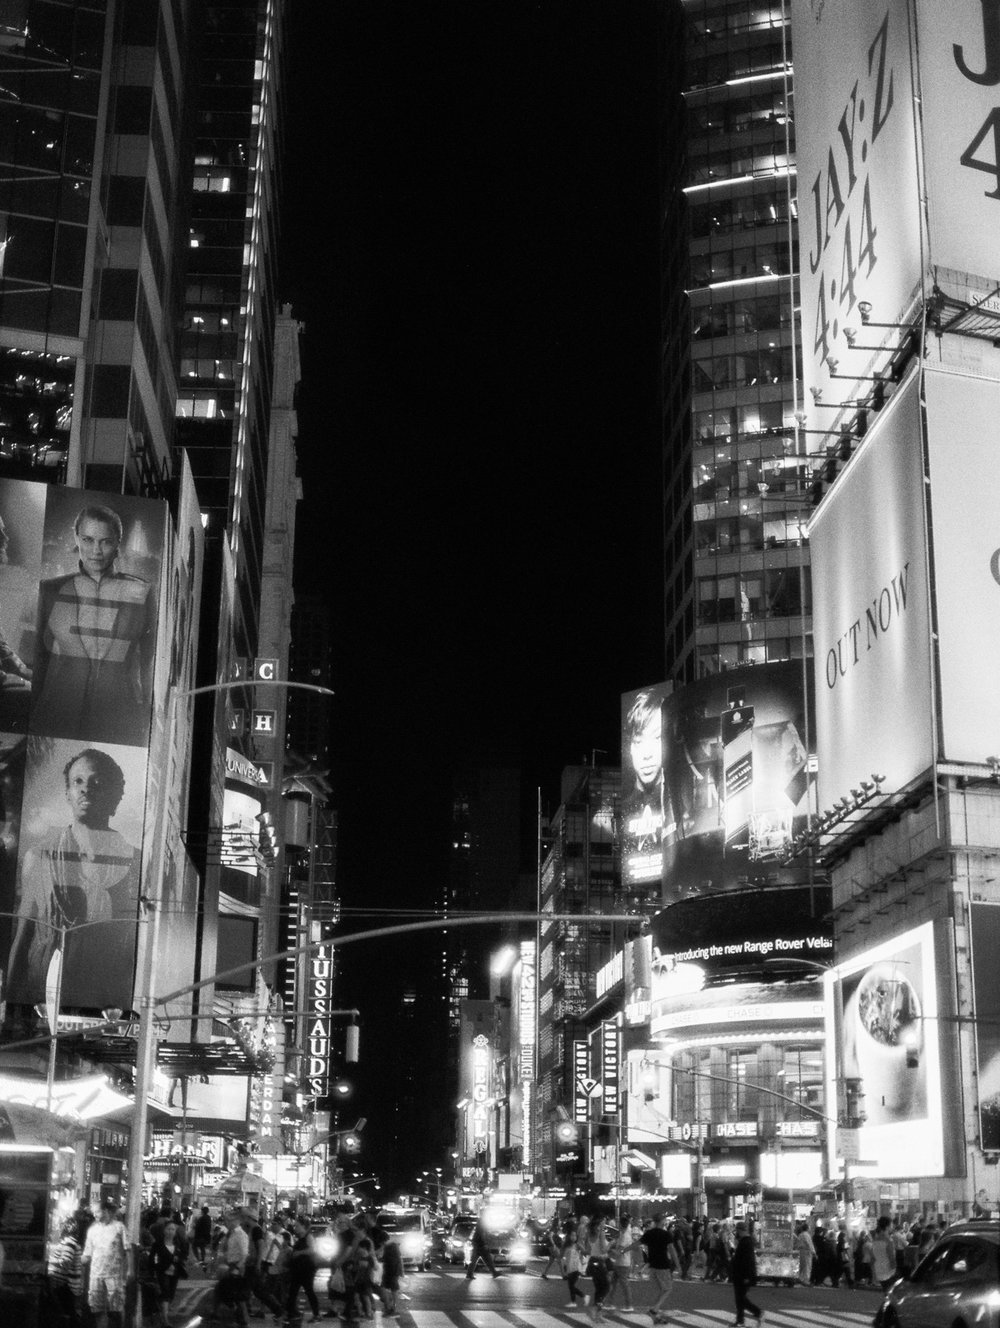  Times Square at night on black and white film, ilford delta 3200 